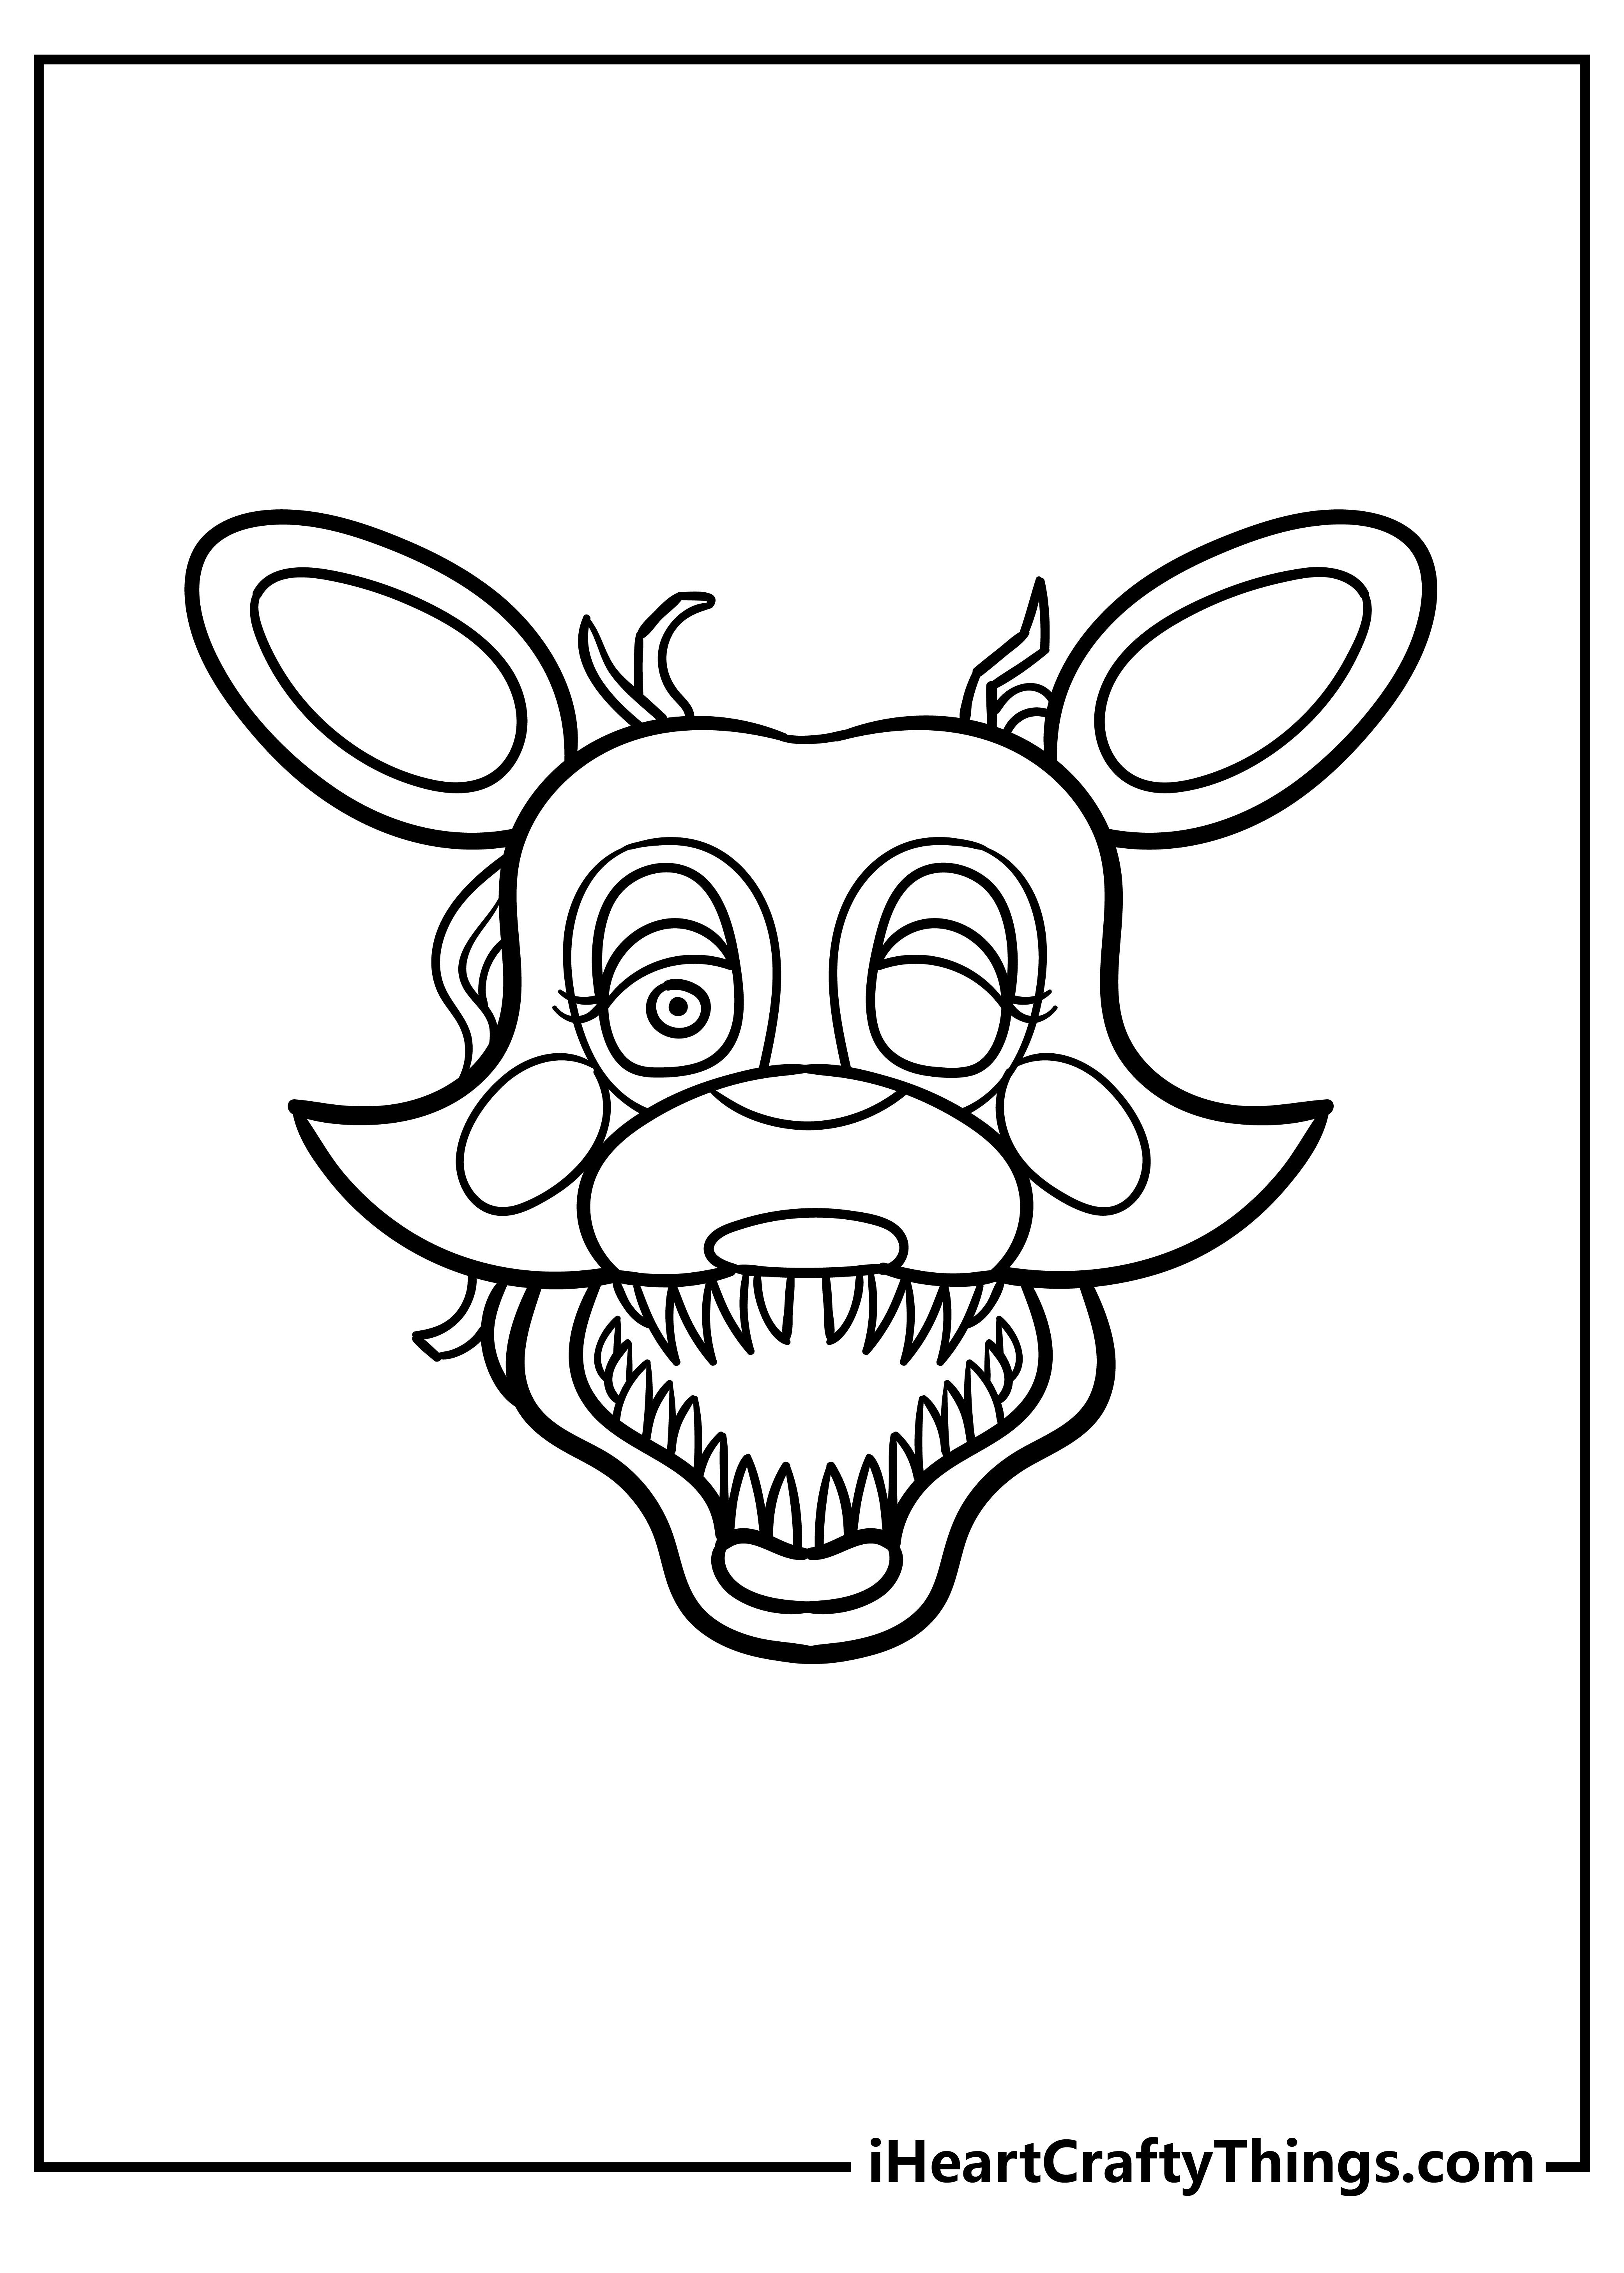 Five Nights At Freddy's Coloring Pages ...